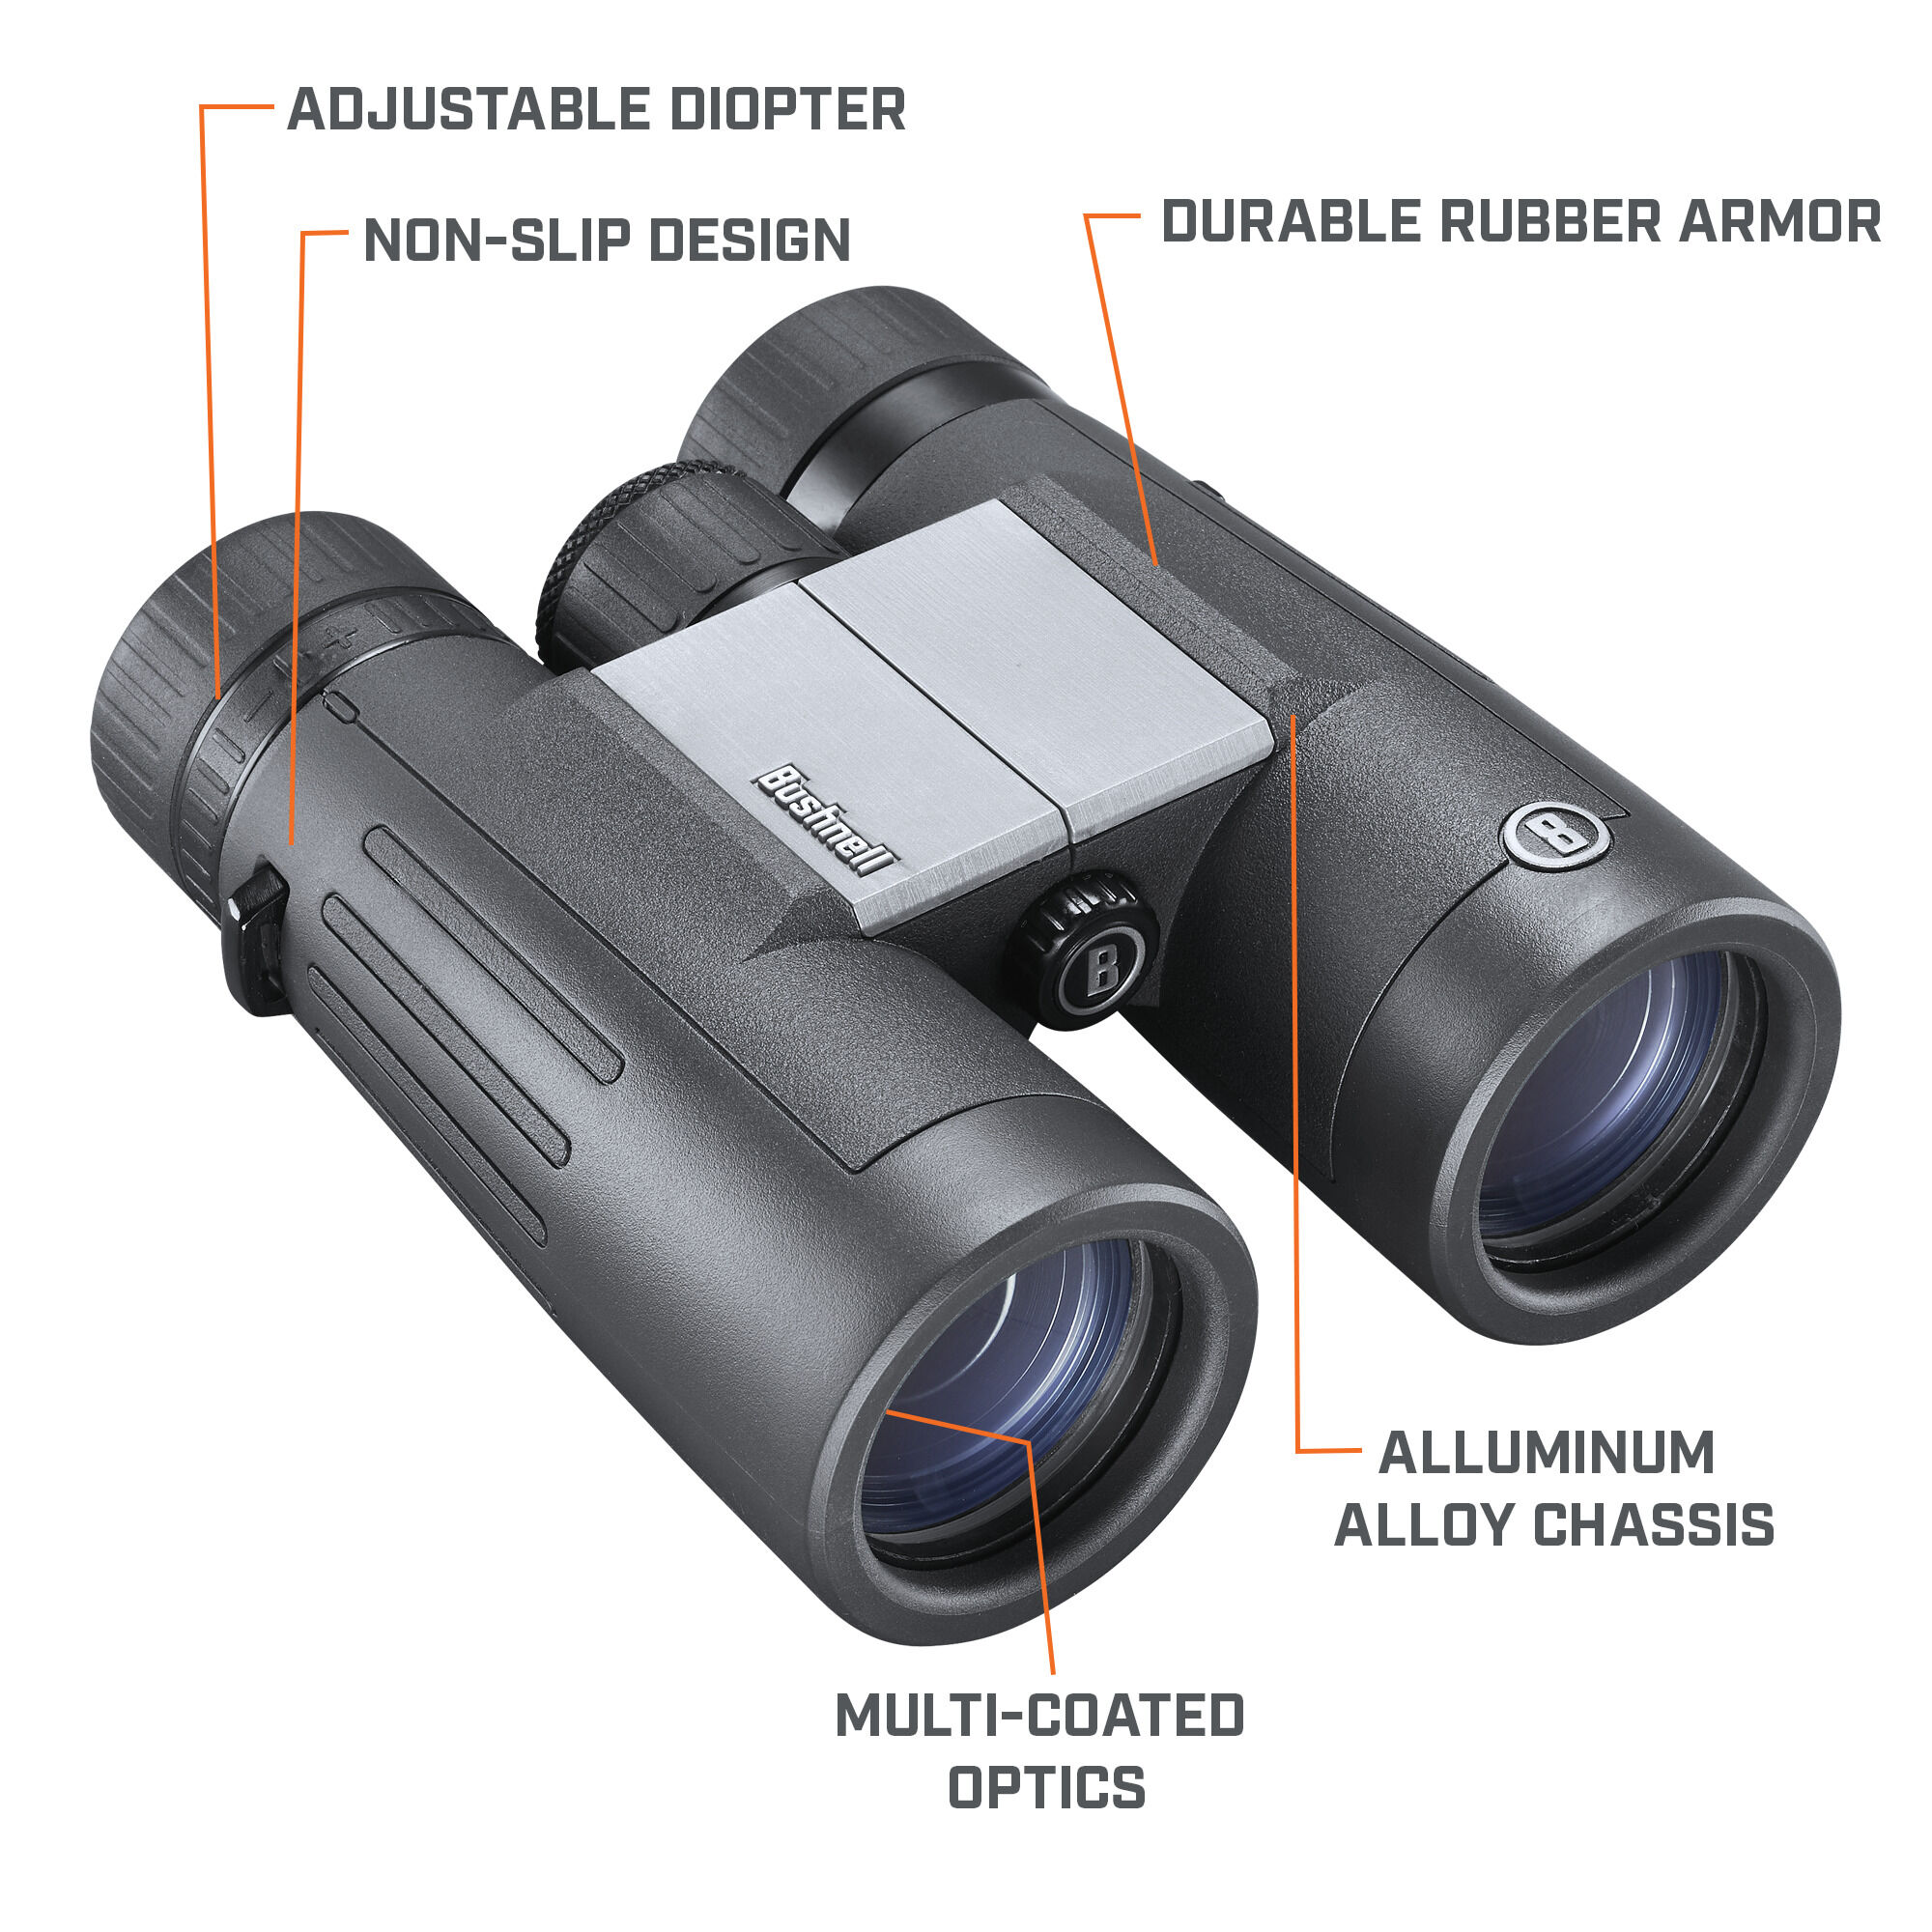 Powerview 2 Compact Binoculars, 8x42 Magnification| Bushnell